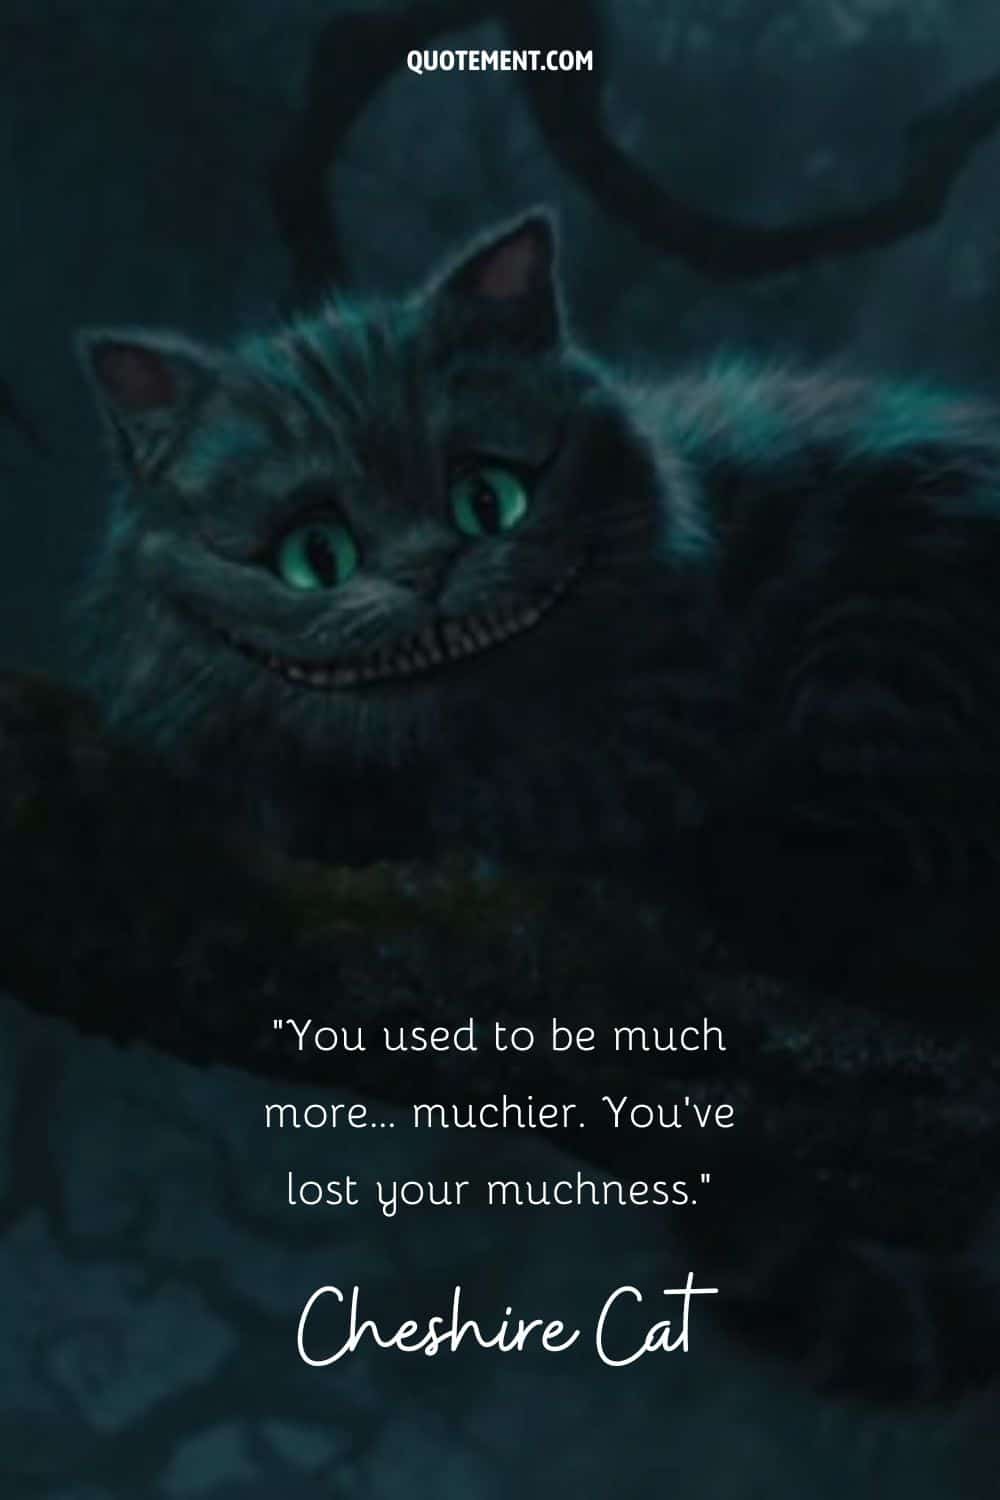 Interesting quote from the Cheshire Cat and its image in the background as well